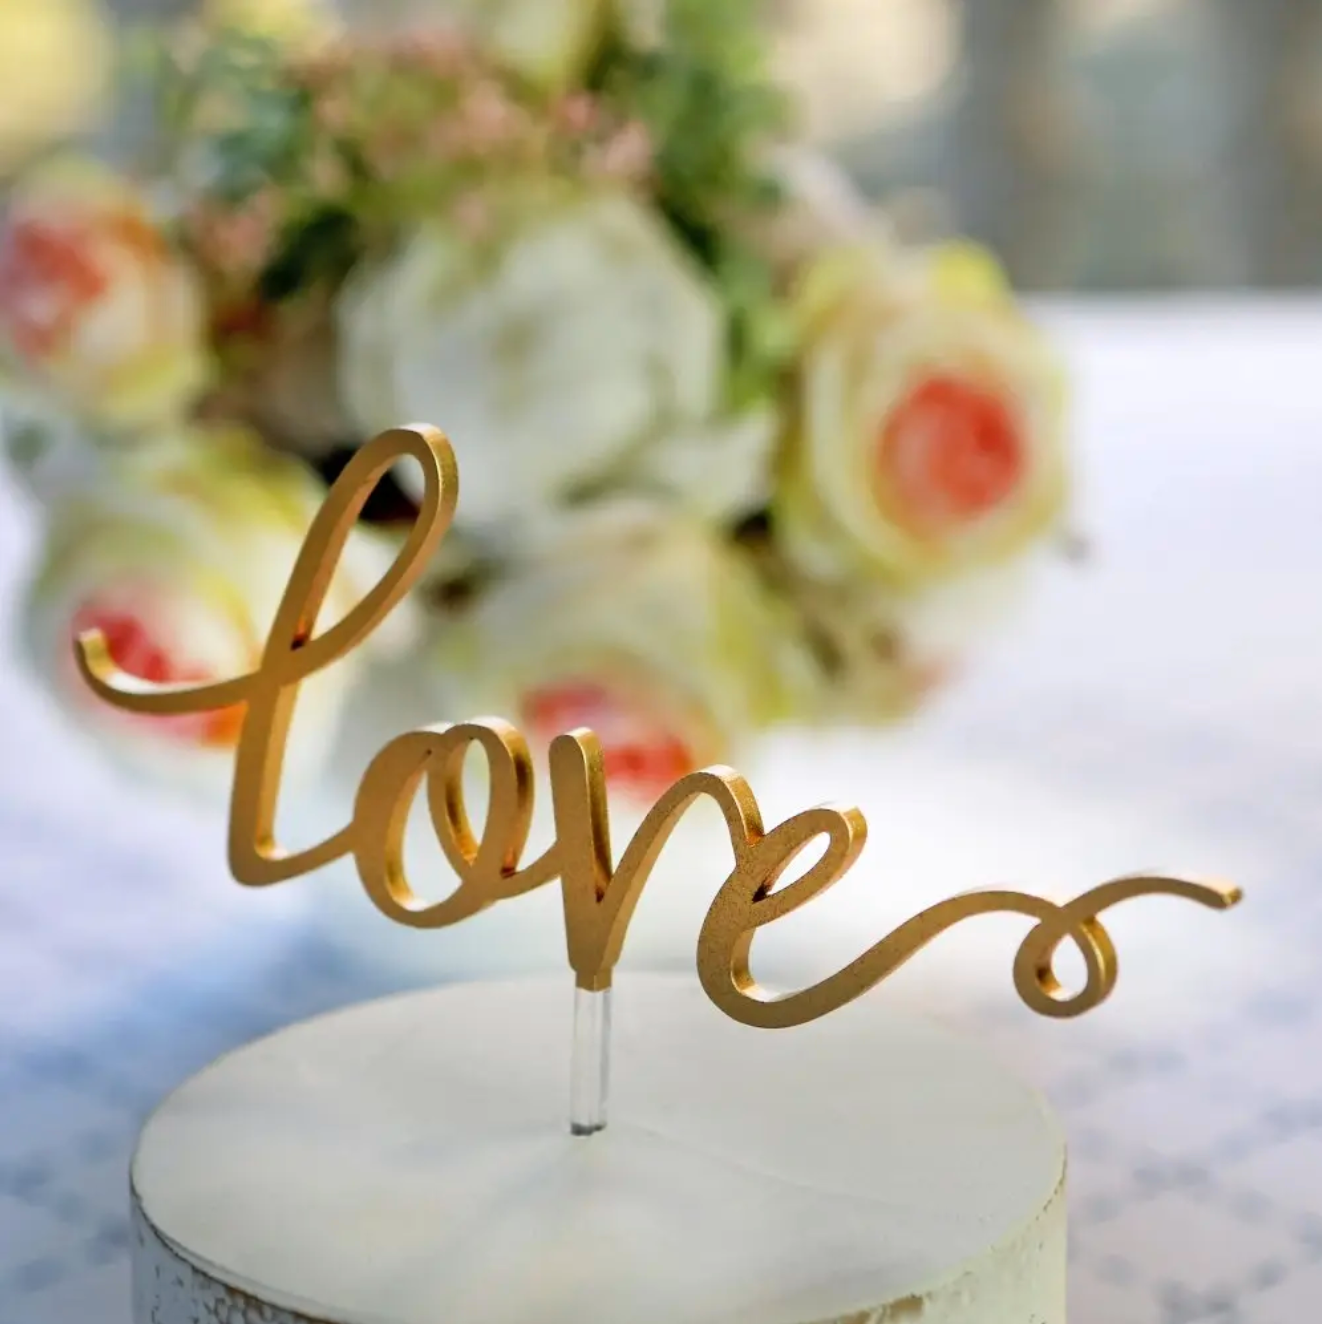 Top Cake Gold Acrylic Love Cake Topper - Mirrored, Heart - 5 3/4 x 5 1/4  - 1 count box